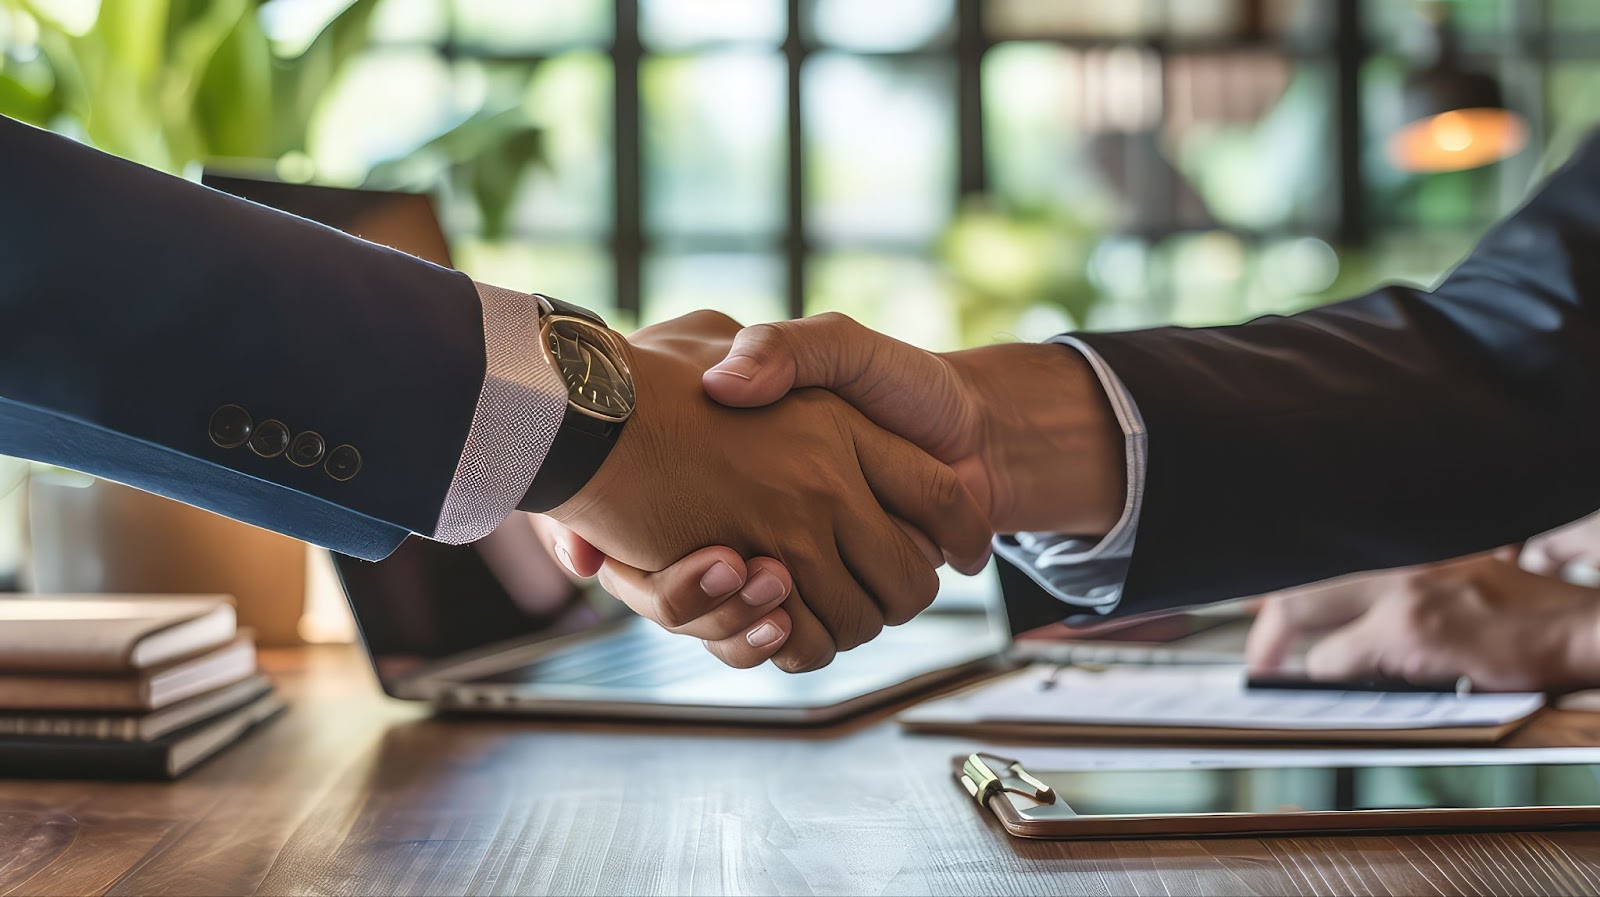 Two business people shaking hands over a table, symbolizing a professional agreement